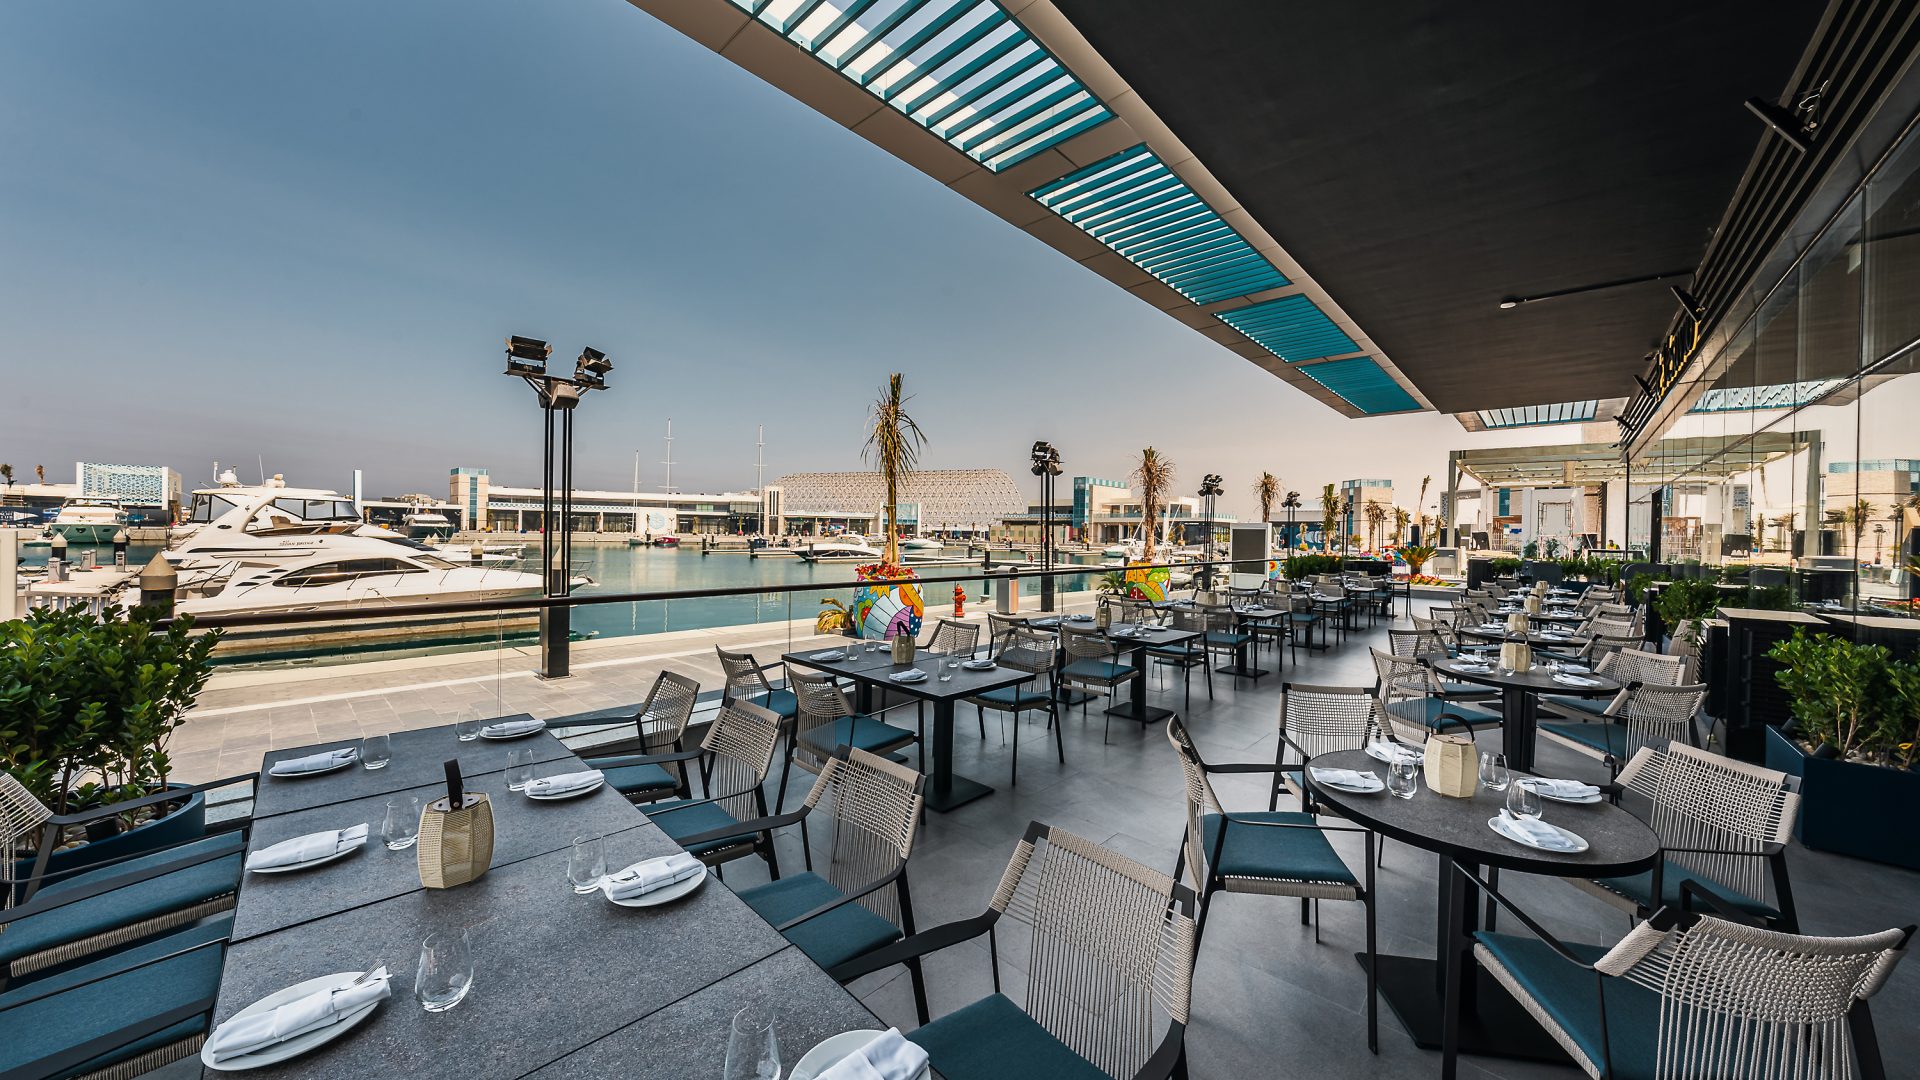 Luxurious outdoor dining area at Le Vesuvio Italian Restaurant in Jeddah Yacht Club - Cool Inc